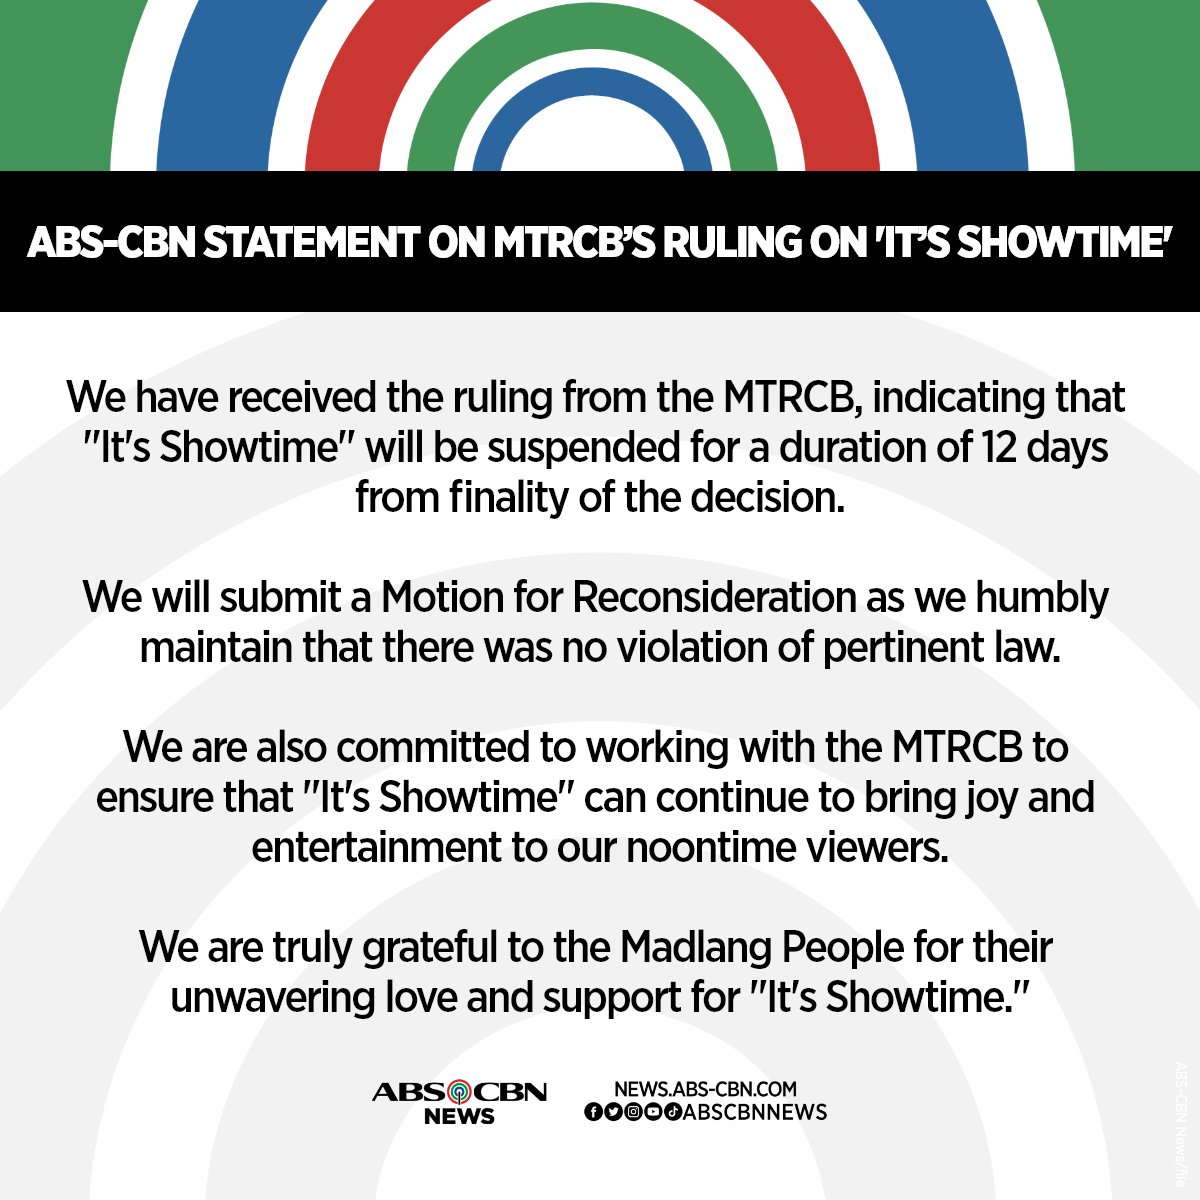 READ: ABS-CBN's official statement regarding MTRCB’s 12-day suspension on the airing of “It’s Showtime.”